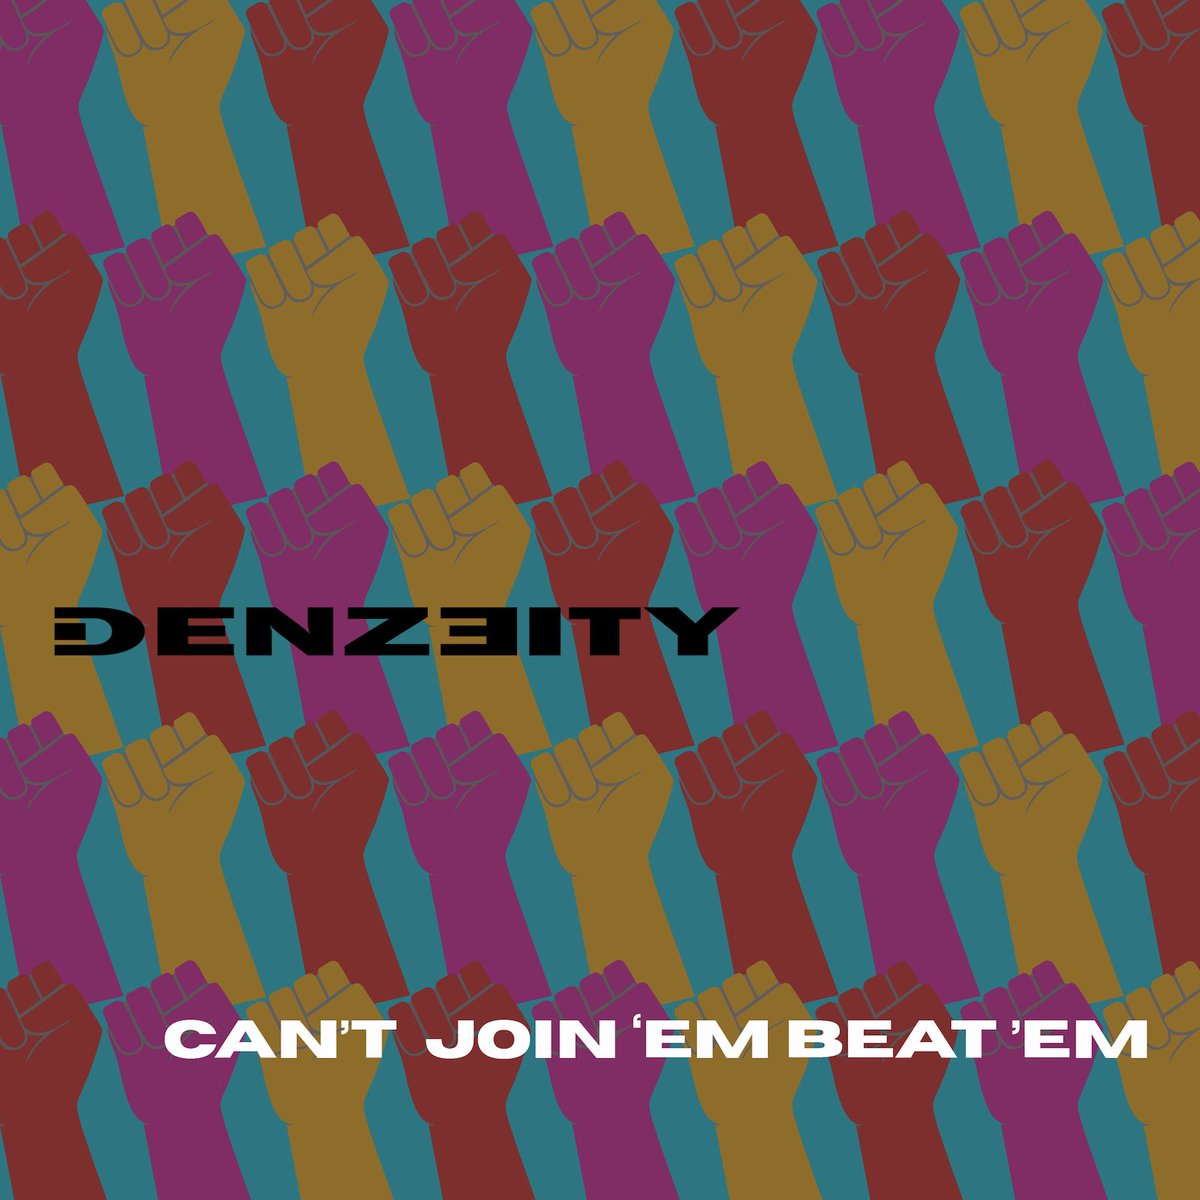 My new song is out Friday 5th April. I really wanted to go against the grain with this one. This tune will be called Can’t Join ‘em Beat ‘em 🤘🏼🖤